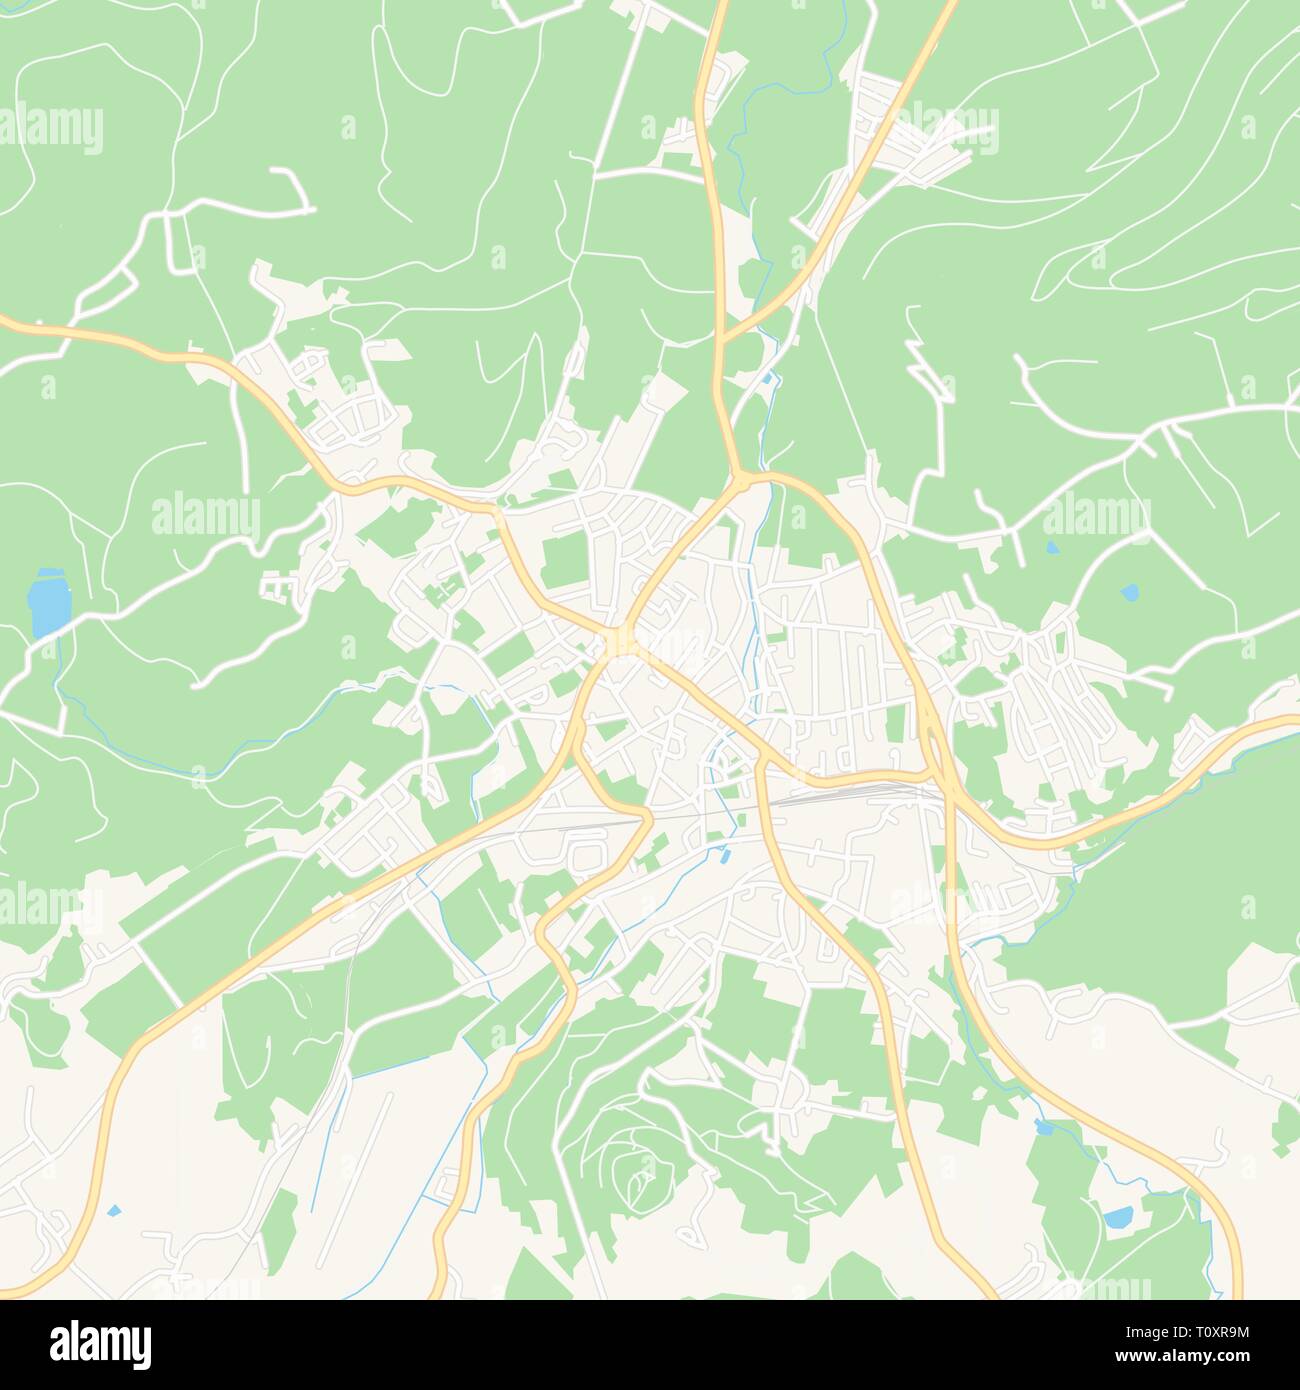 Printable map of Feldkirchen, Austria with main and secondary roads and larger railways. This map is carefully designed for routing and placing indivi Stock Vector